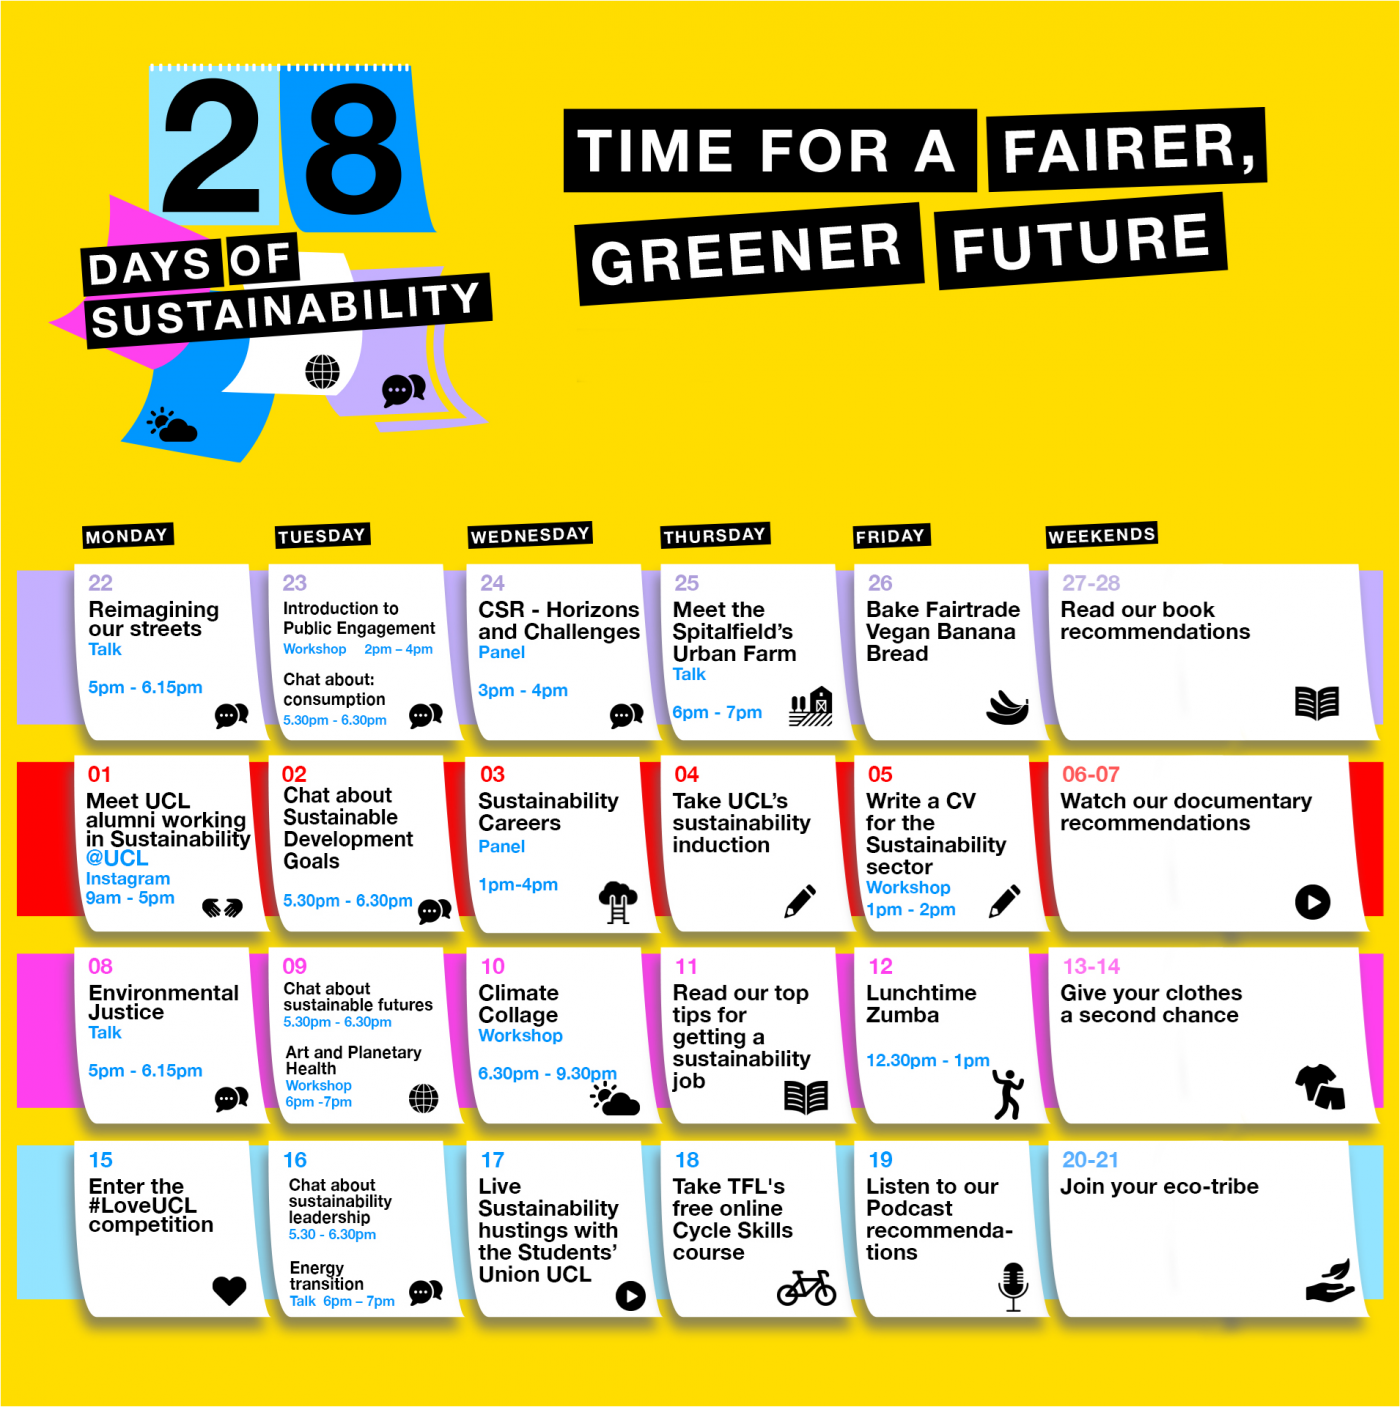 28-days-of-sustainability-time-for-a-fairer-greener-future